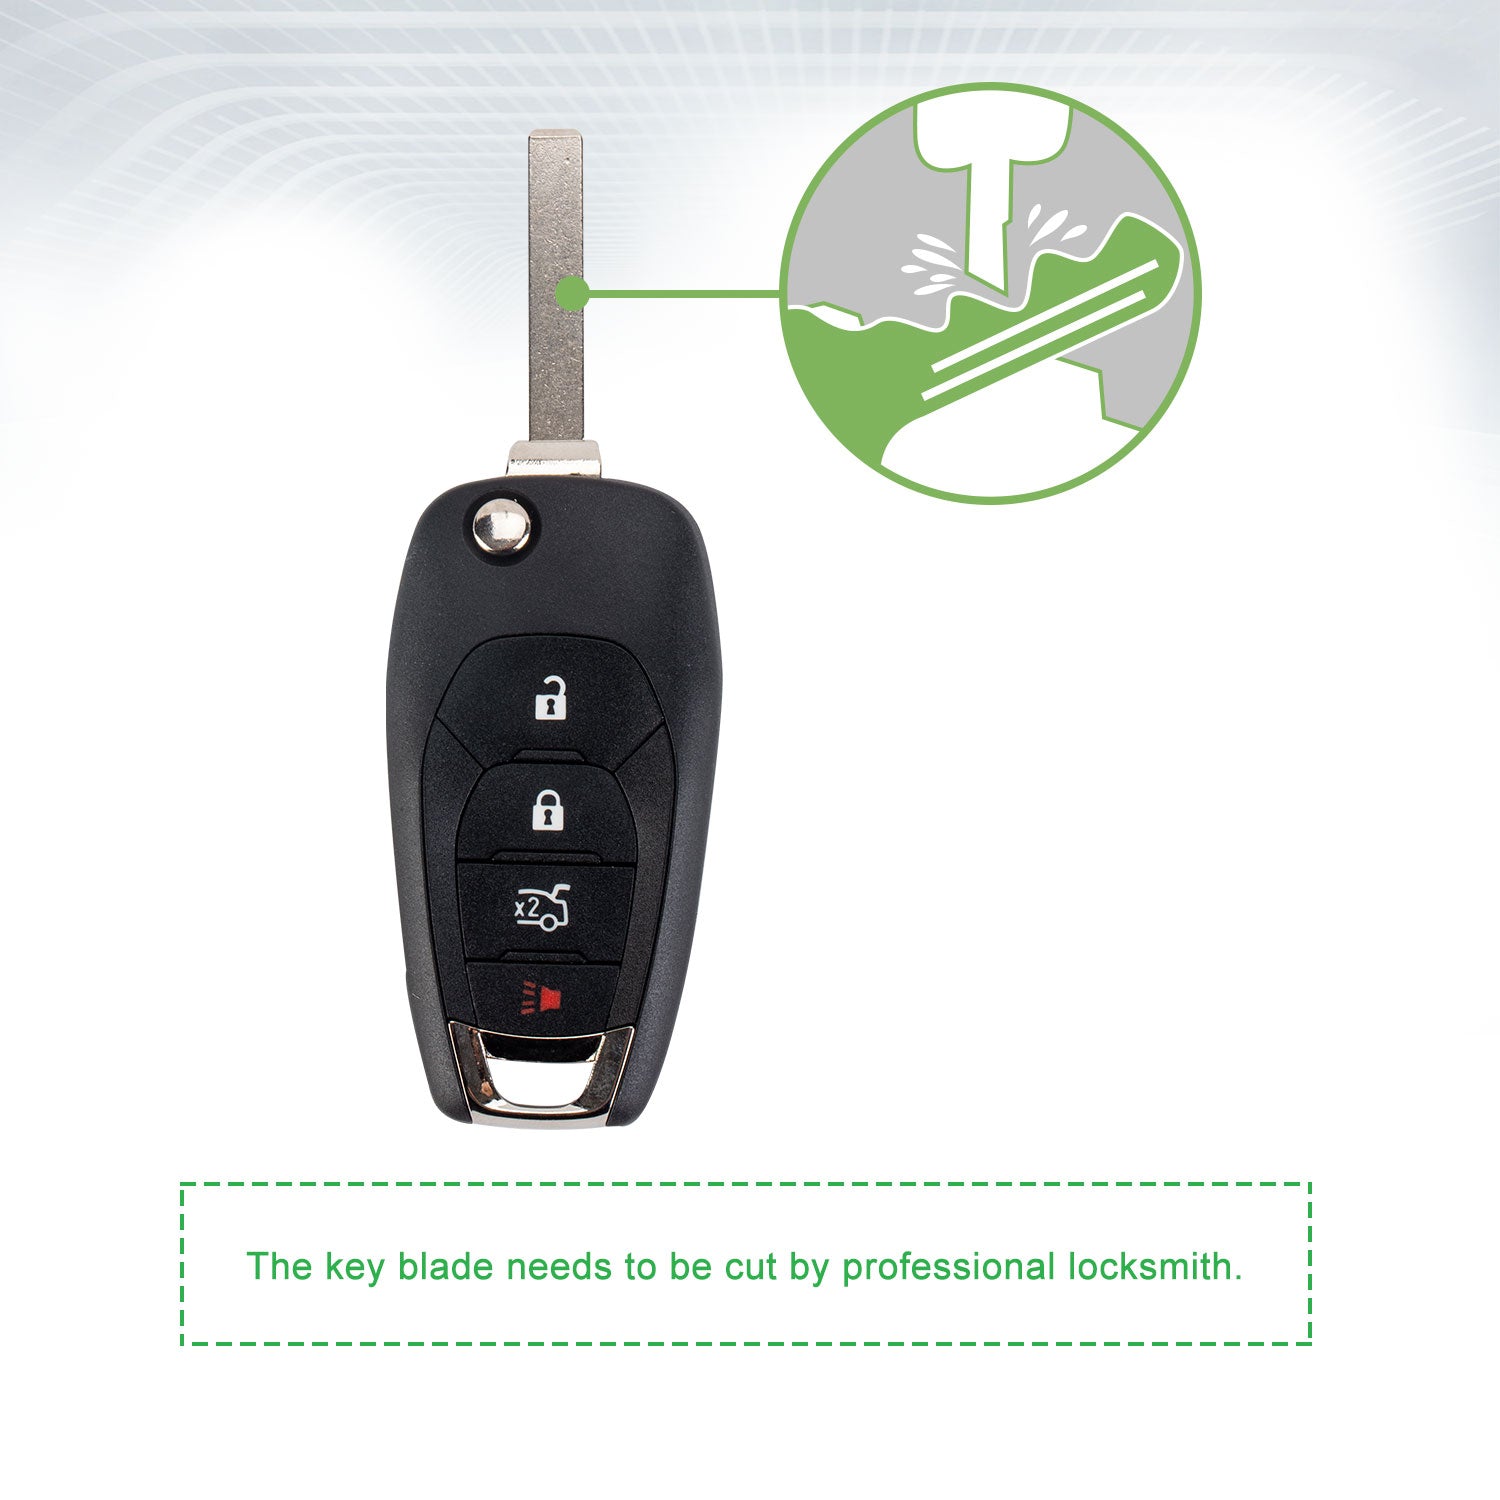 Lots of 5 Extra-Partss Keyless Remote Car Key Fob Replacement for Chevy LXP-T004 433Mhz fits 2016 2017 2018 2019 Cruze XL8 Systems Only